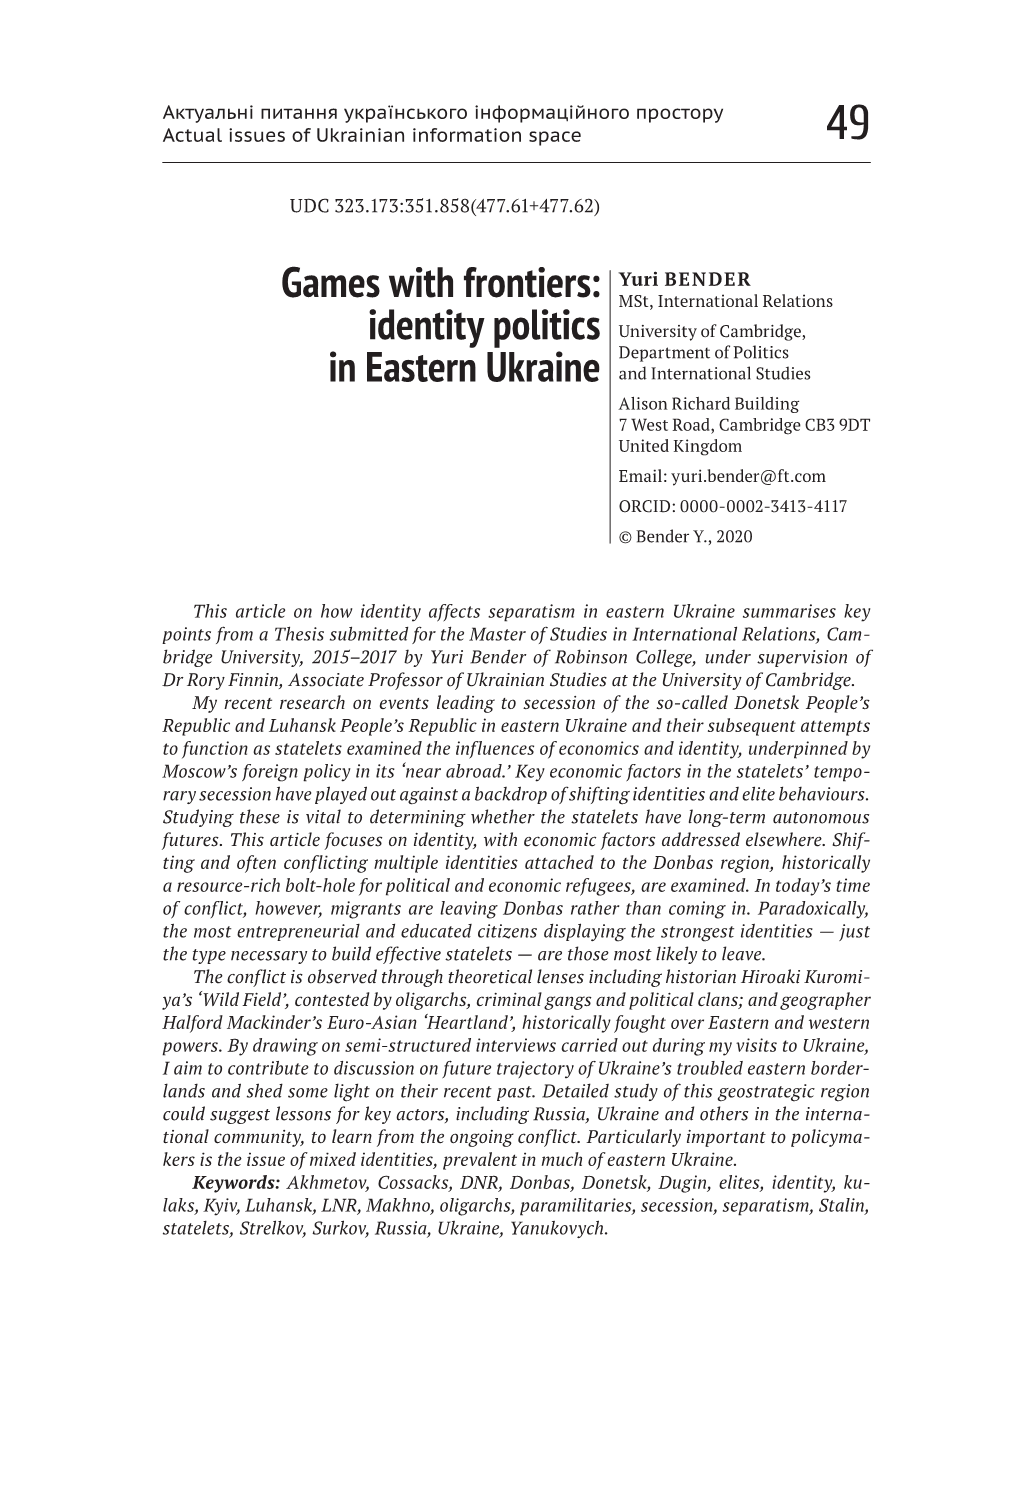 Games with Frontiers: Identity Politics in Eastern Ukraine